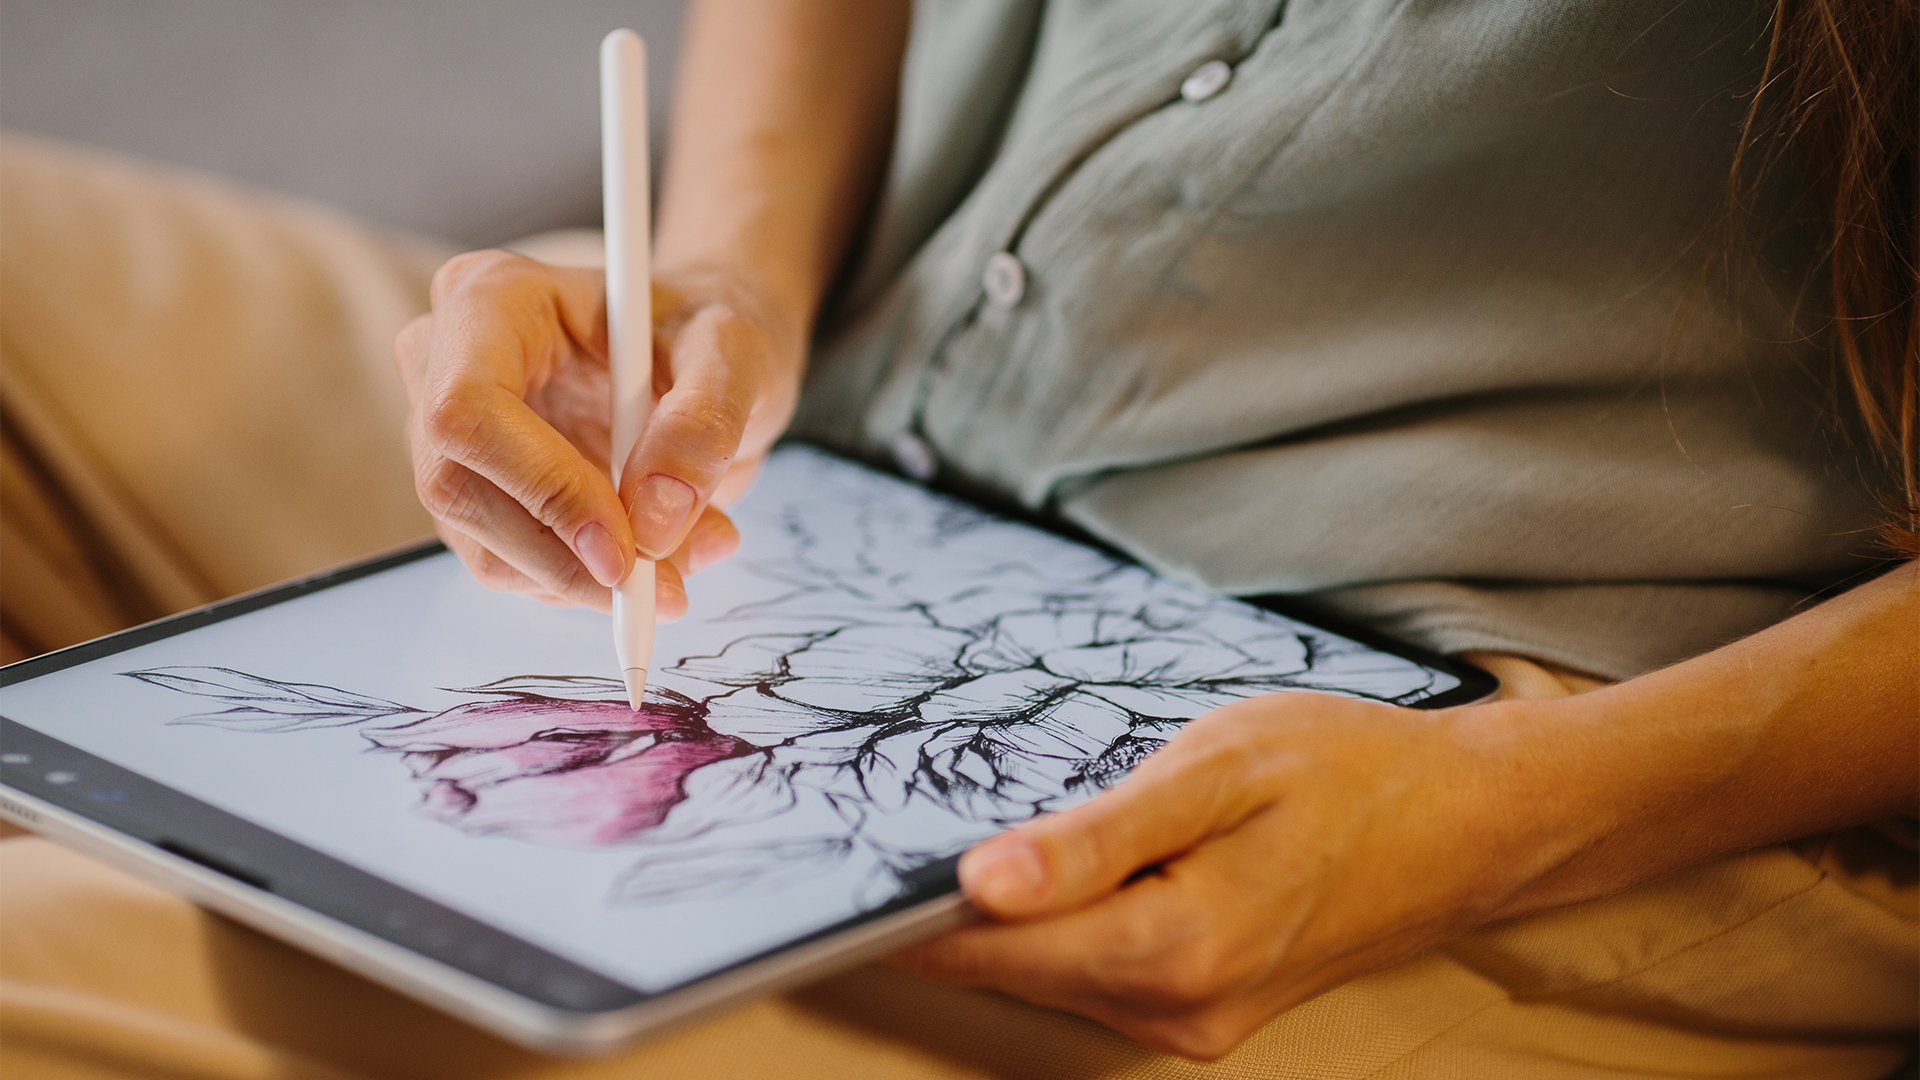 13 Tips Every Apple Pencil User Needs to Know for iPad « iPadOS